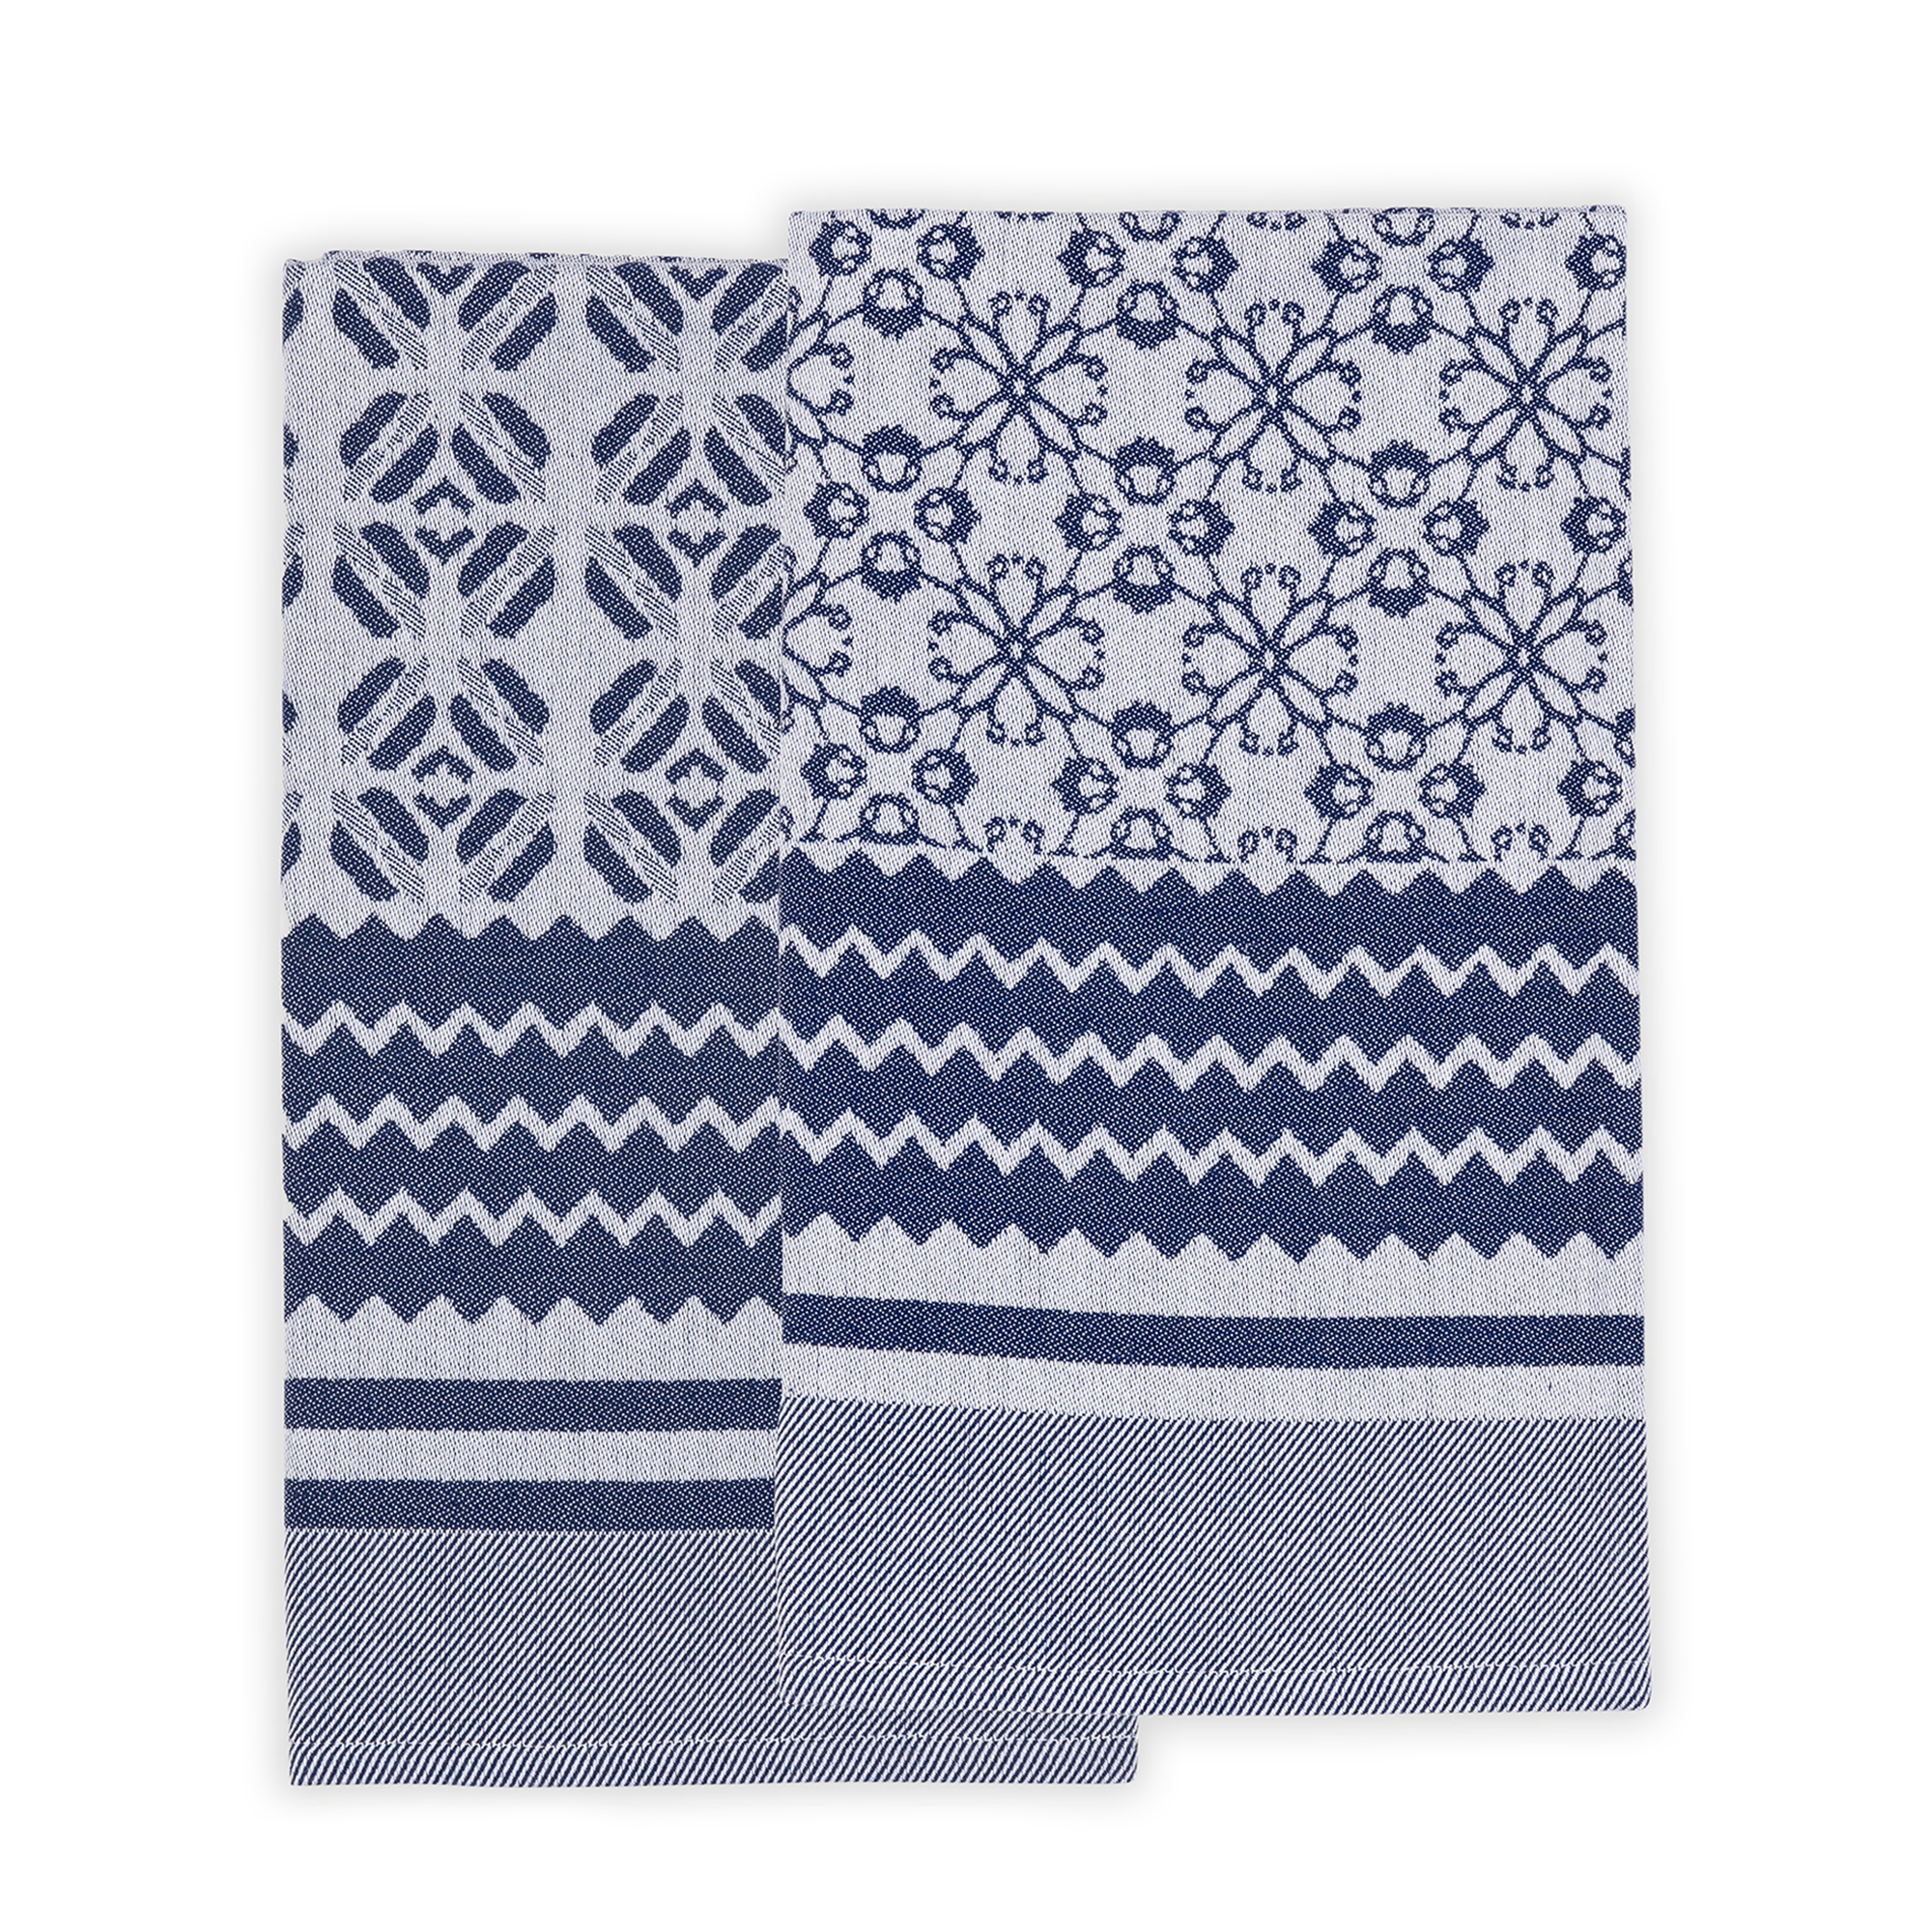 Unique tea towels inspired by Africa's rich culture, jacquard woven from 100% African cotton. Featuring diverse African patterns including floral designs in light and dark blue, these dish towels add vibrancy to your kitchen and intrigue guests.